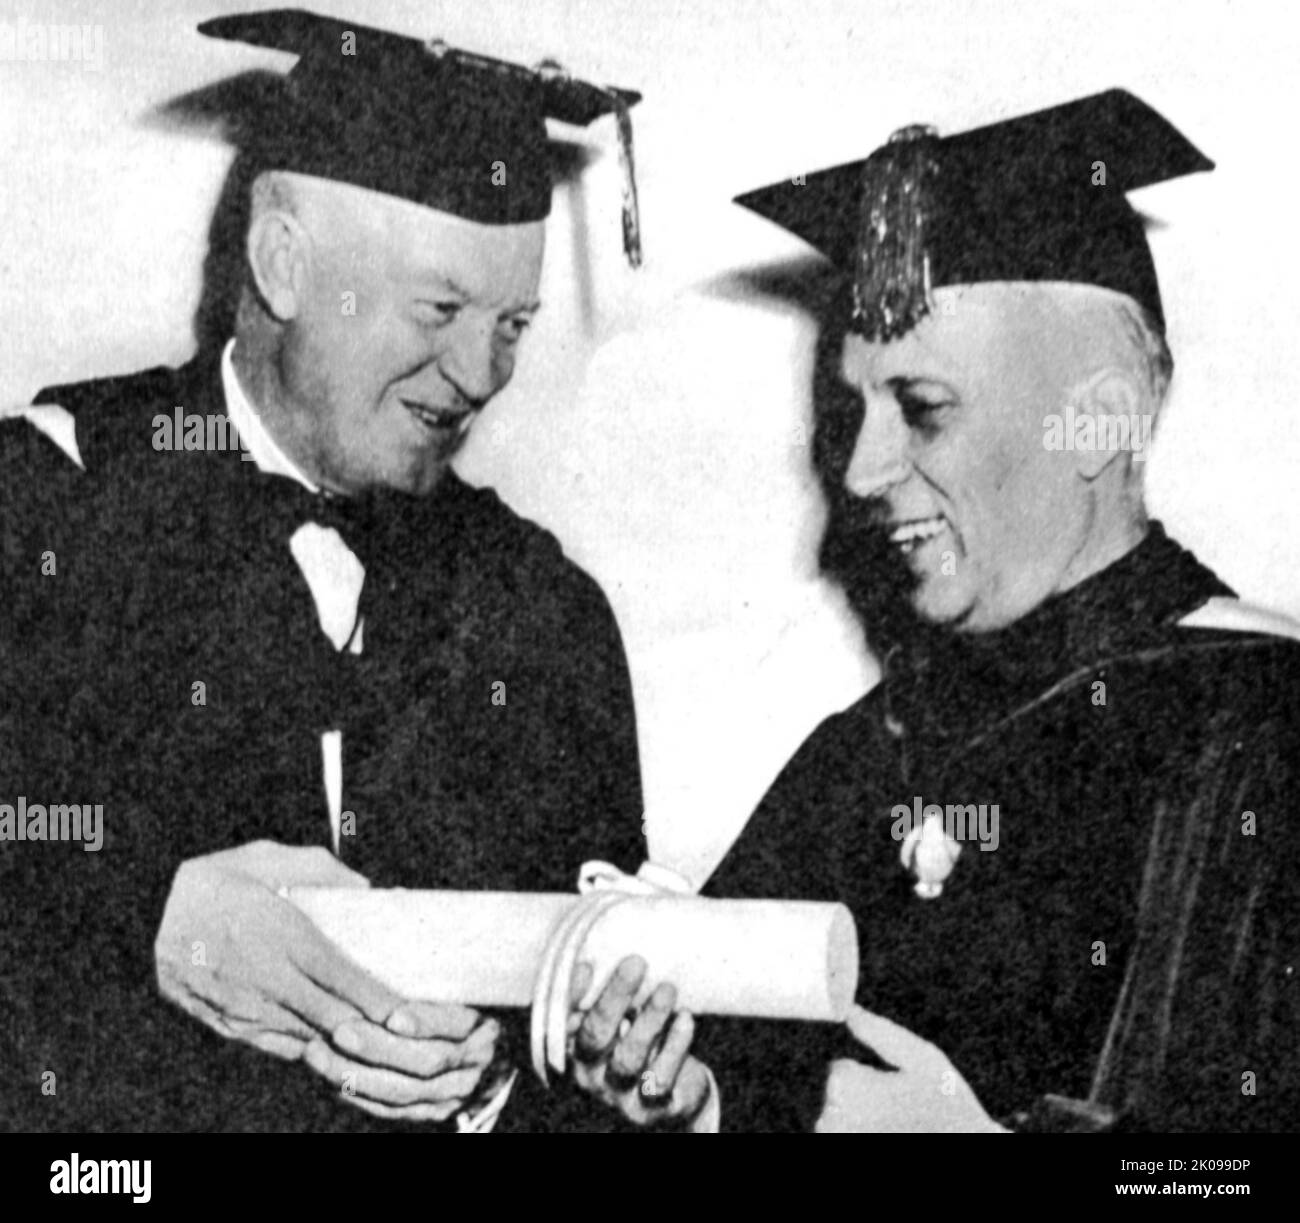 General Eisenhower, President of Columbia University, with Jawaharlal Nehru, Prime Minister of India. David 'Ike' Eisenhower GCB, OM, RE, GCS, CCLH, KC, NPk (October 14, 1890 - March 28, 1969) was an American military officer and statesman who served as the 34th president of the United States from 1953 to 1961. Jawaharlal Nehru (14 November 1889 - 27 May 1964) was an Indian anti-colonial nationalist, secular humanist, social democrat and author who was a central figure in India during the middle third of the 20th century. Upon India's independence in 1947, he served as the country's prime mini Stock Photo